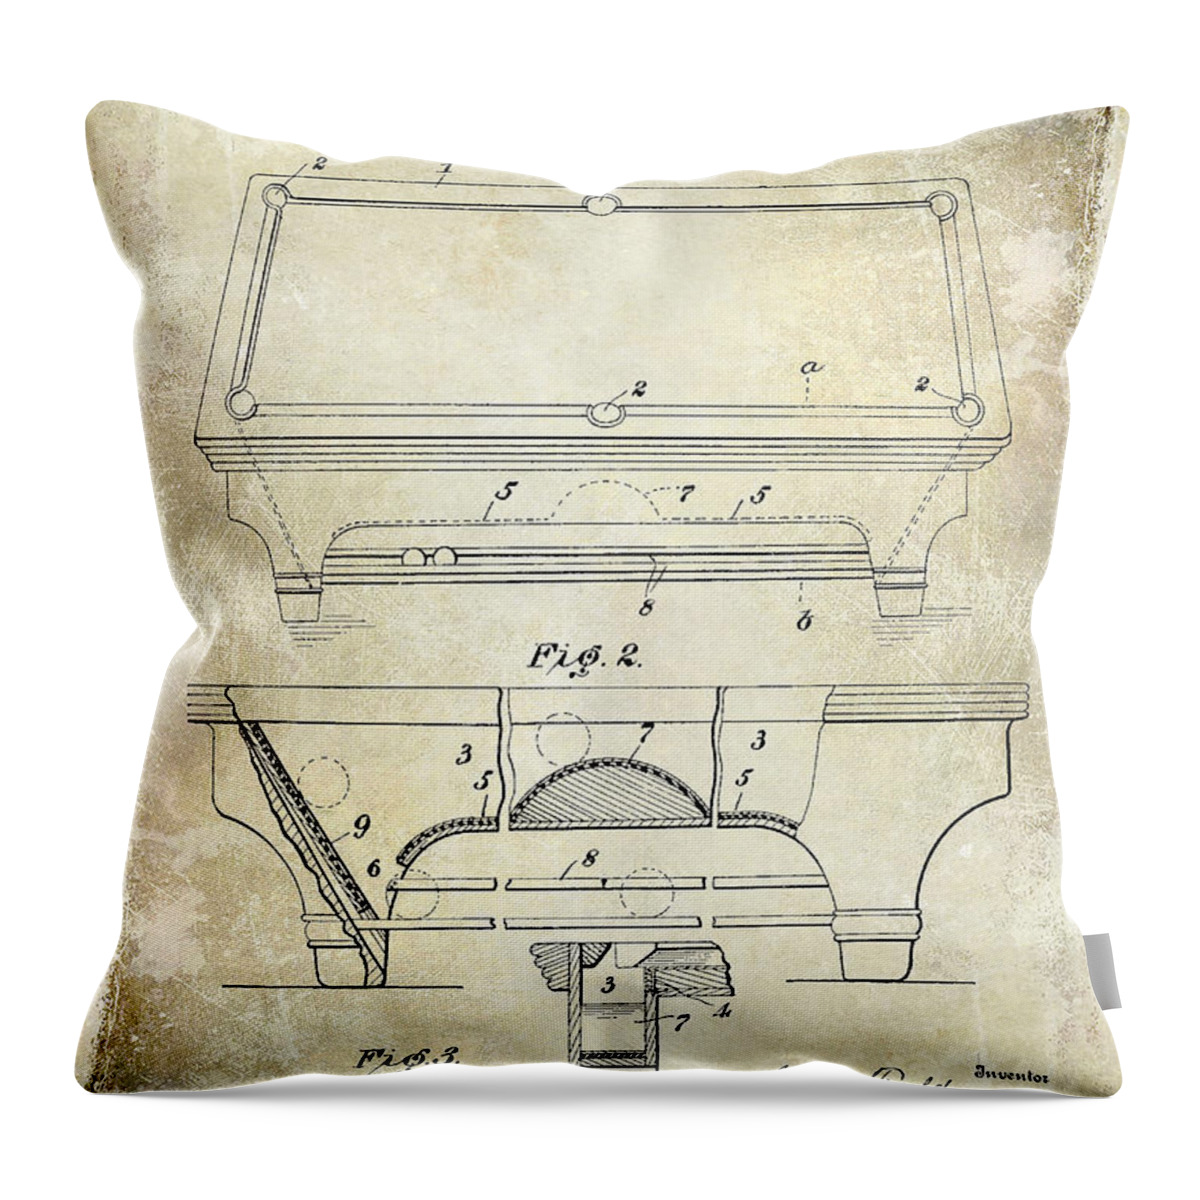 1909 Throw Pillow featuring the photograph 1909 Billiard Table Patent Drawing by Jon Neidert